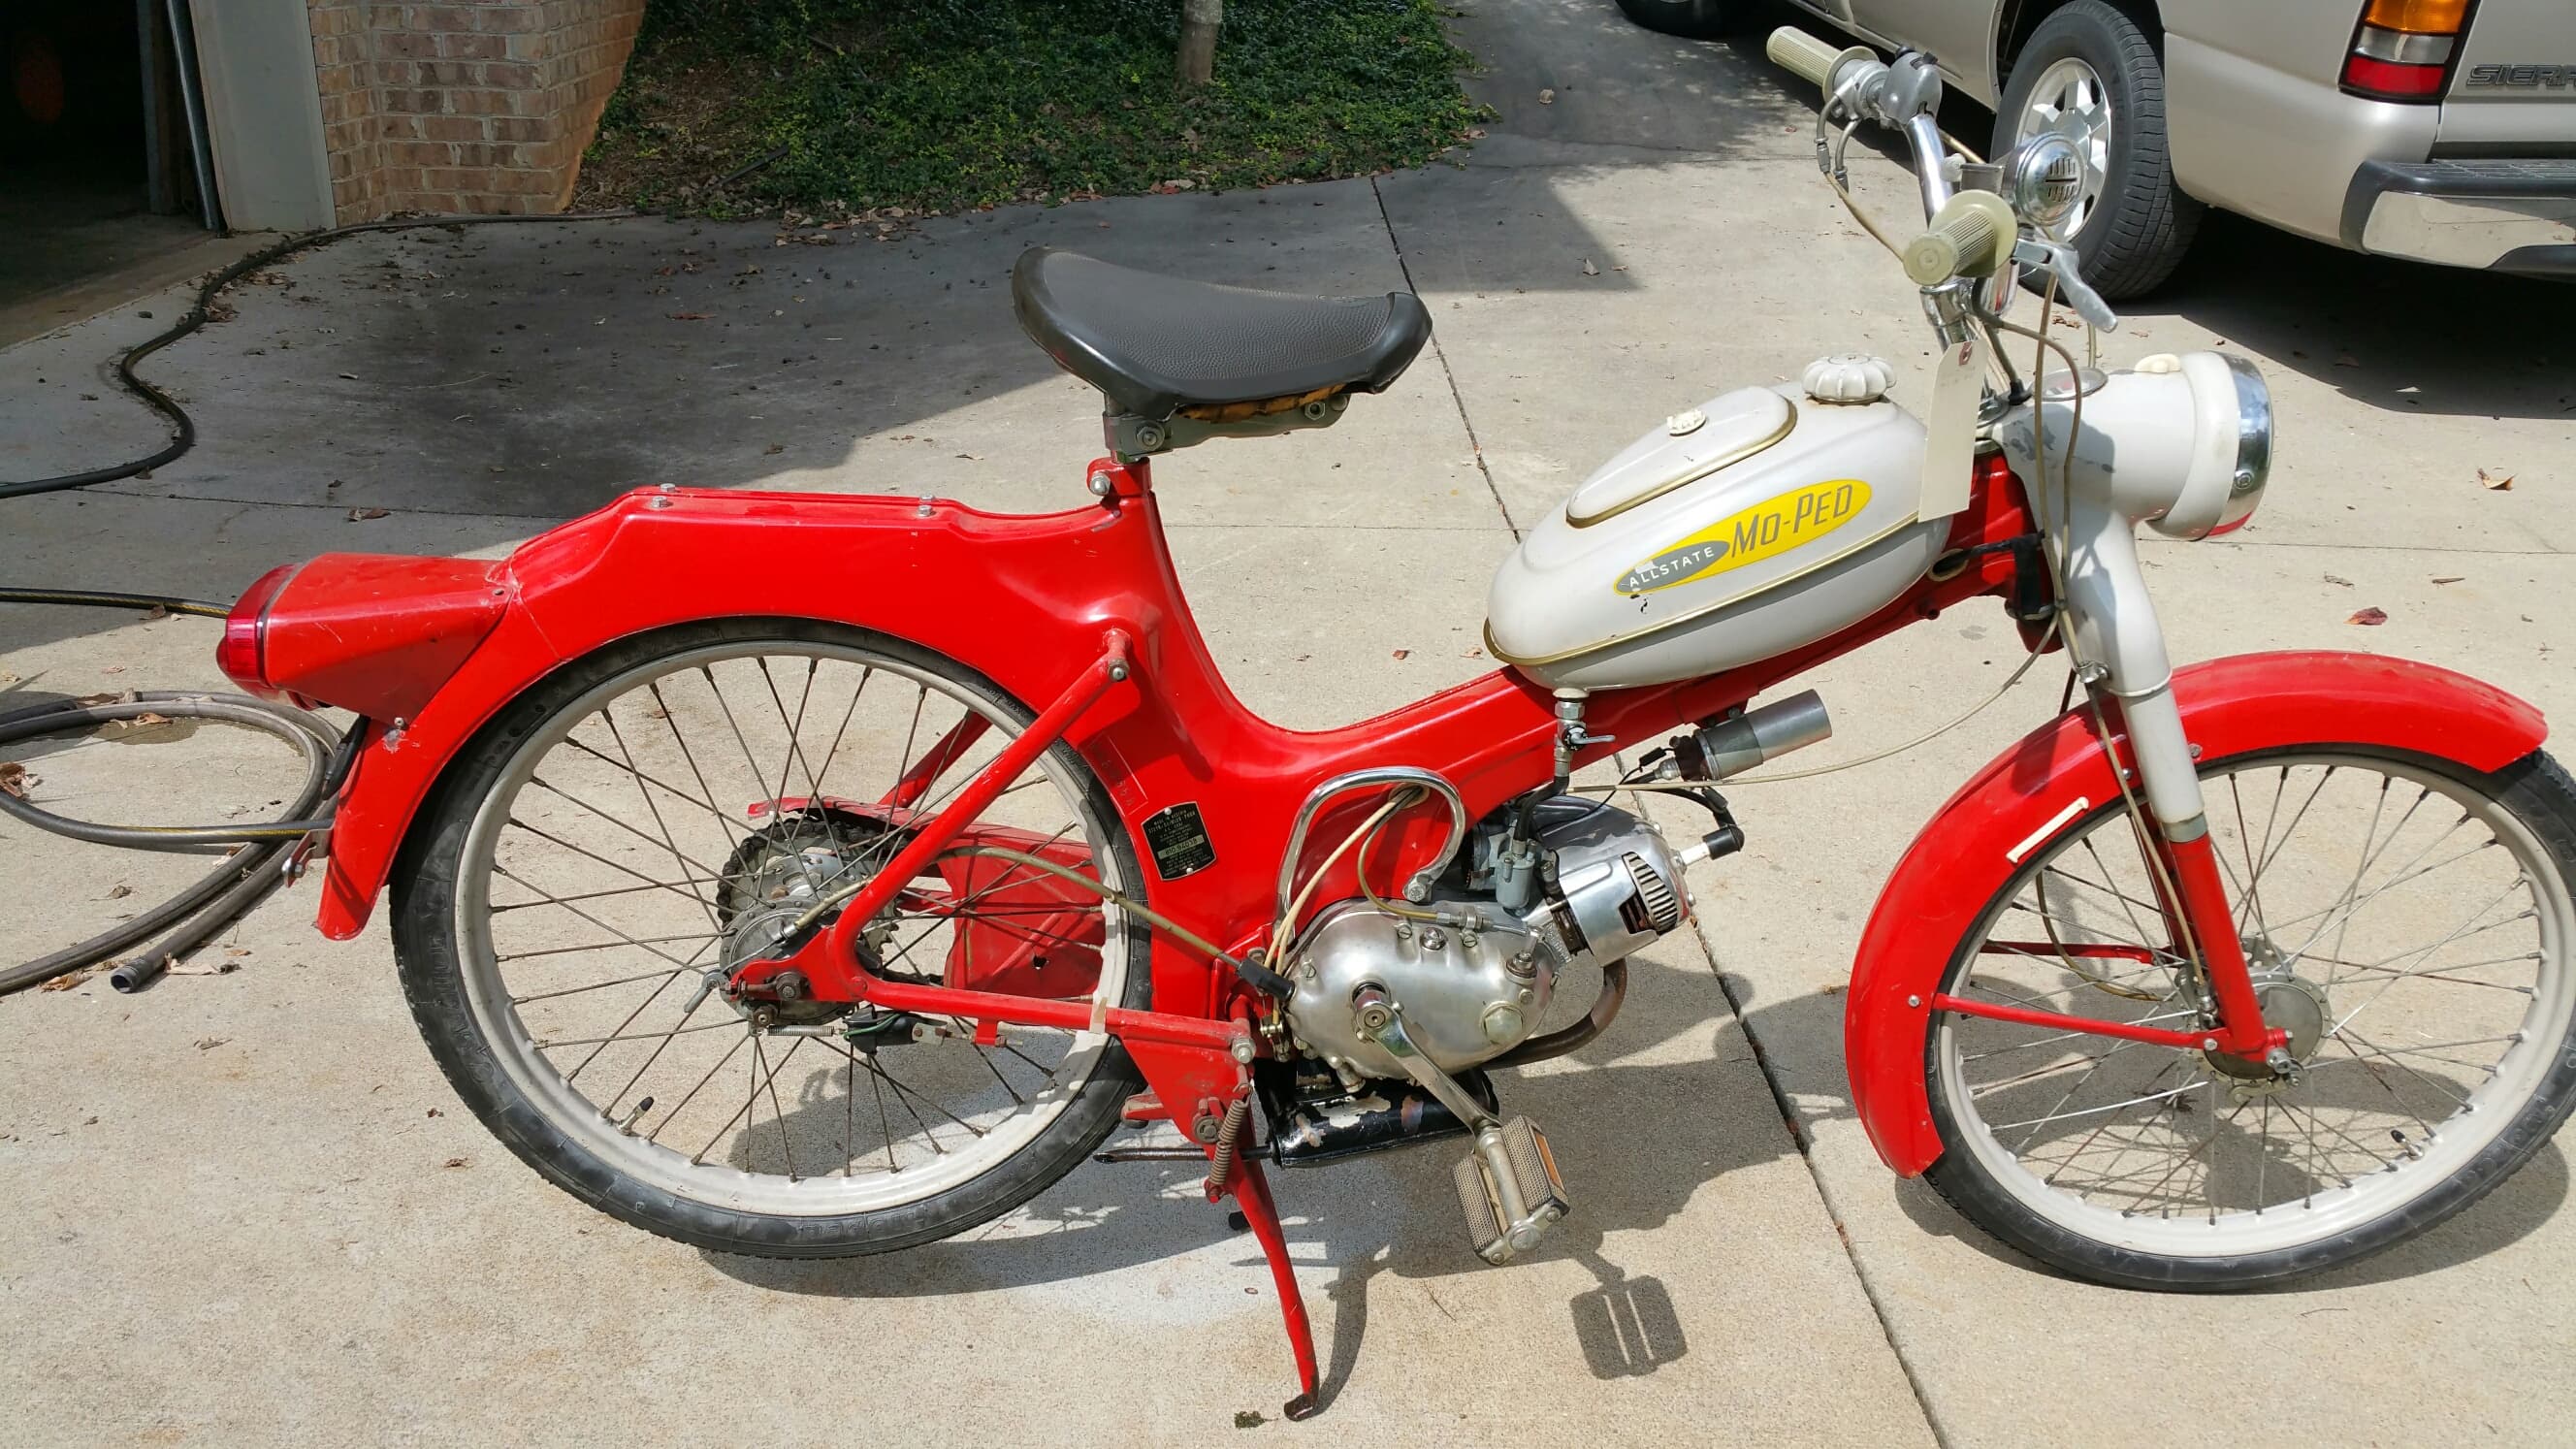 810.94038 Allstate Mo-Ped Puch